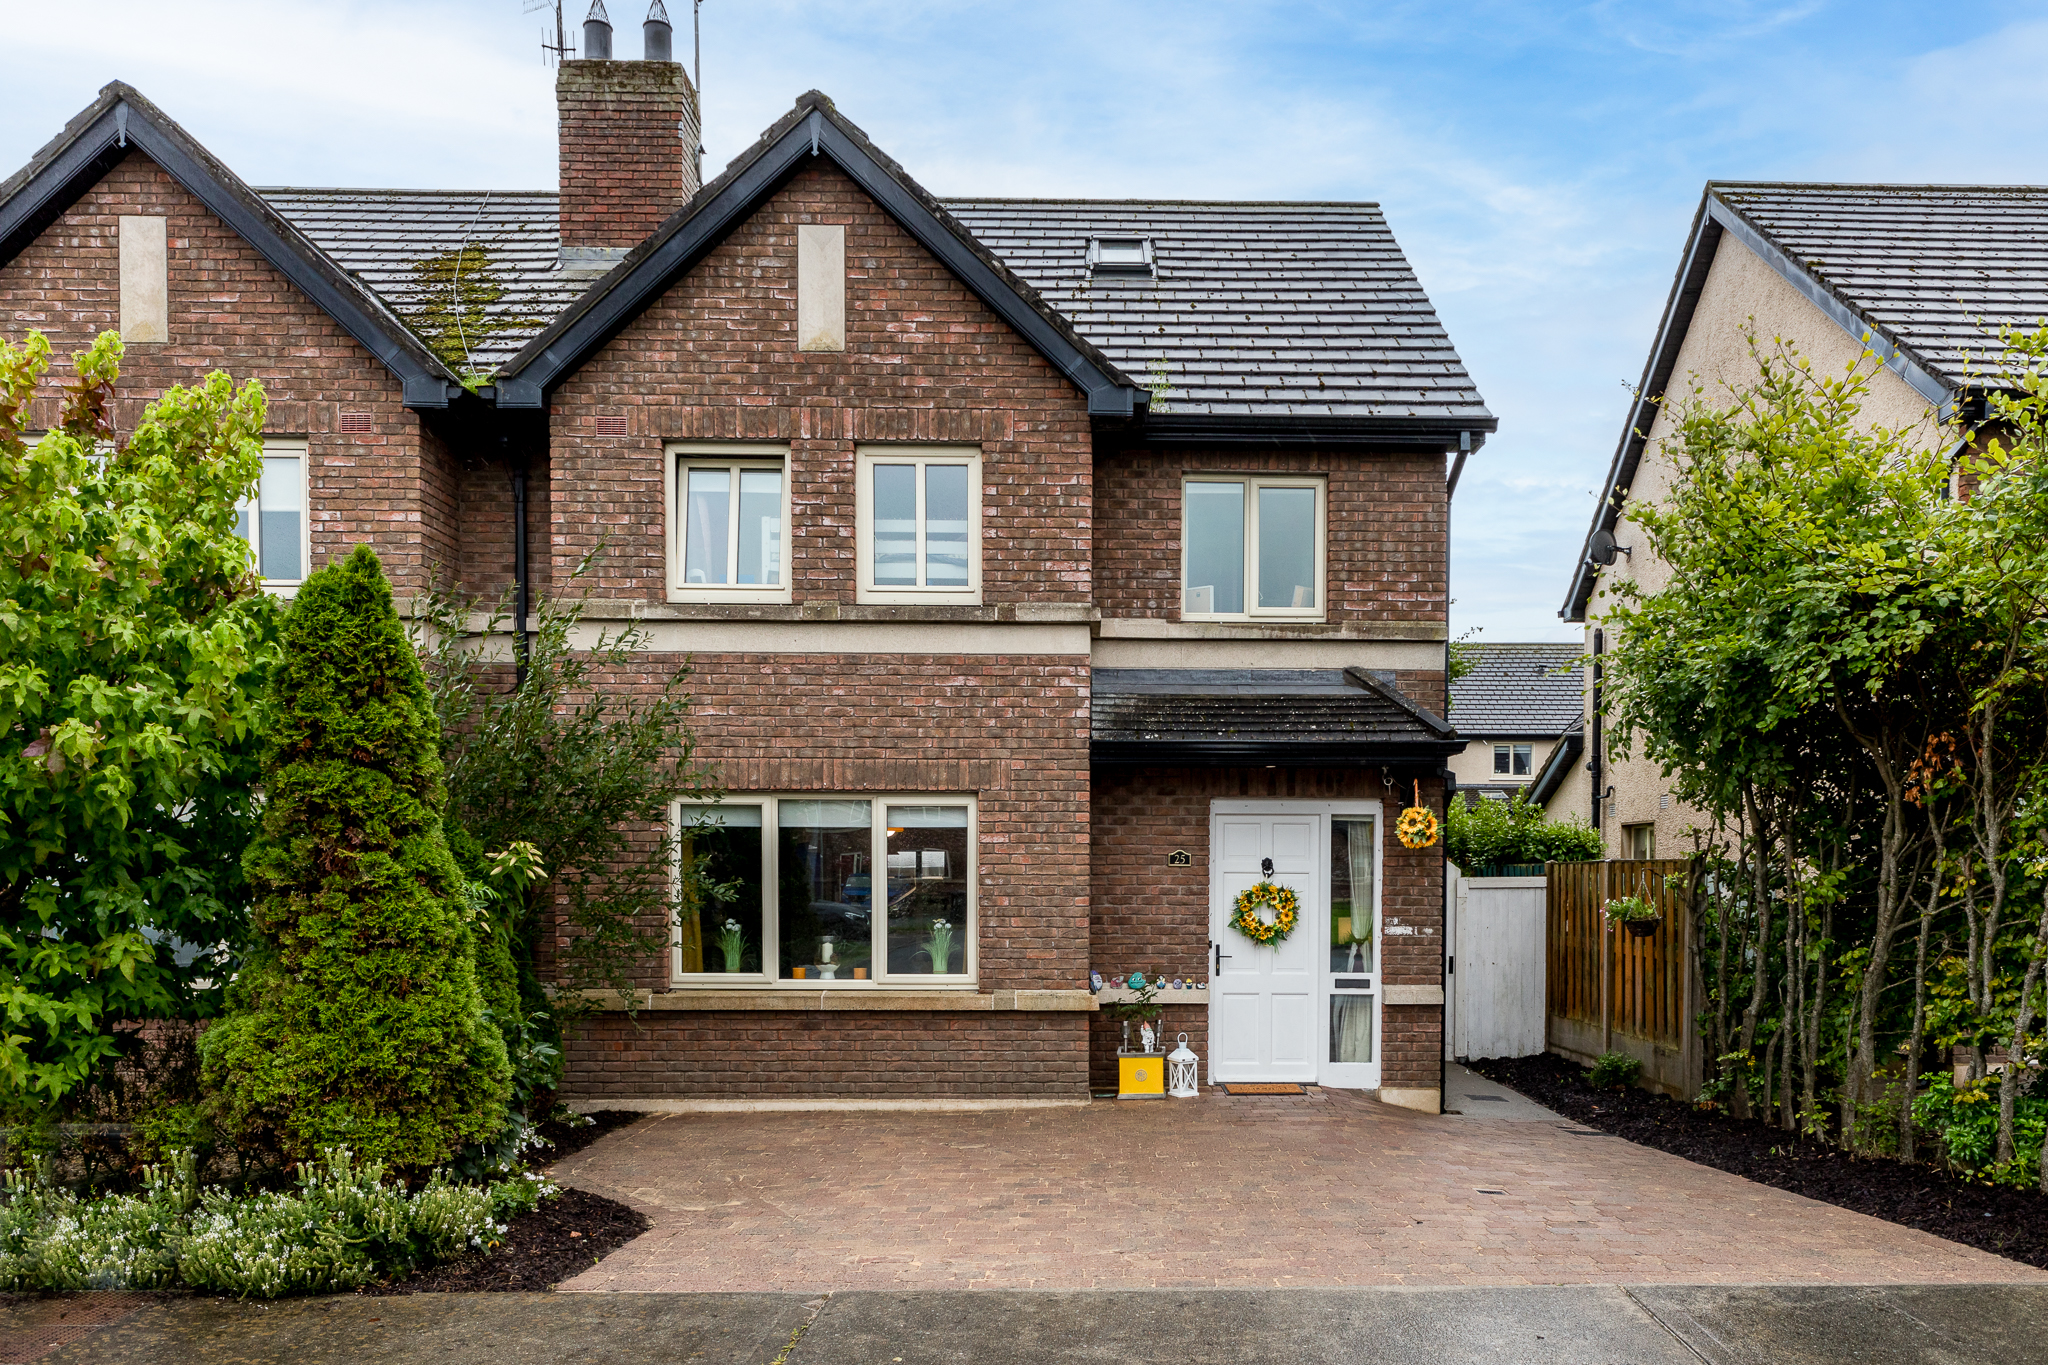 25 The Beeches Clogherhead Co Louth